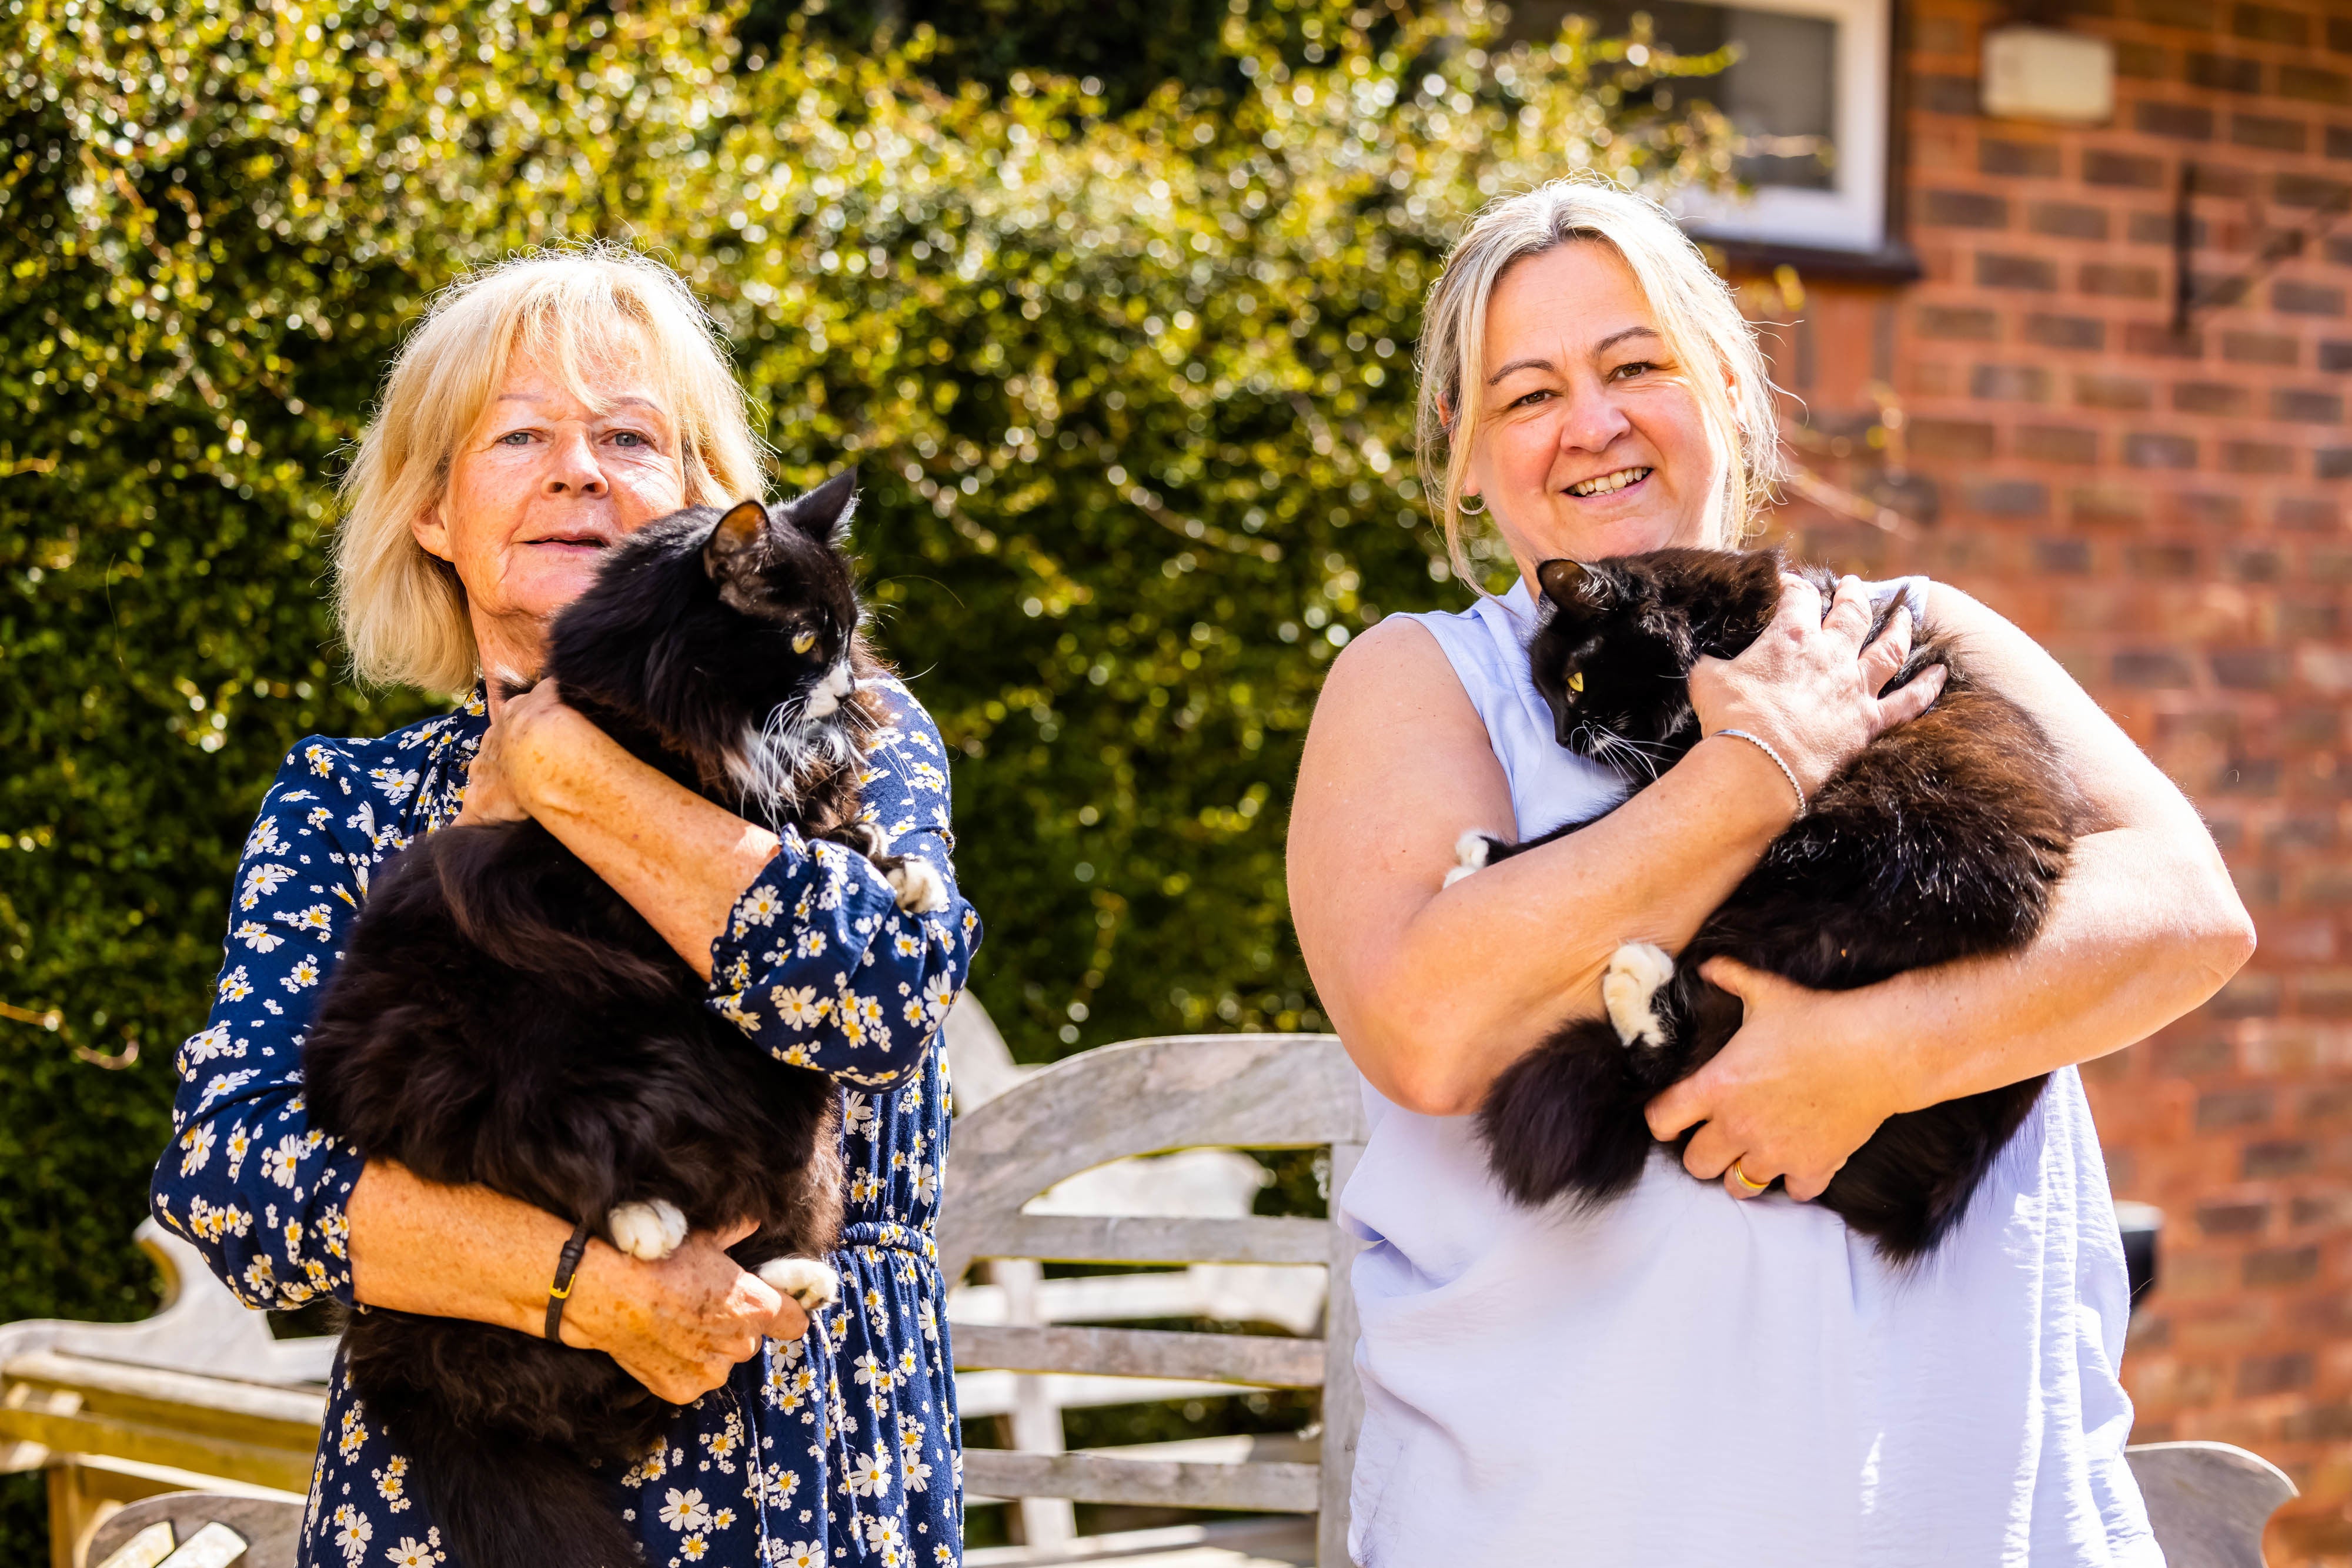 Jasper and Willow were also crowned the winners in the 'Outstanding Rescue Cat' category of this year's Cats Protection National Cat Awards